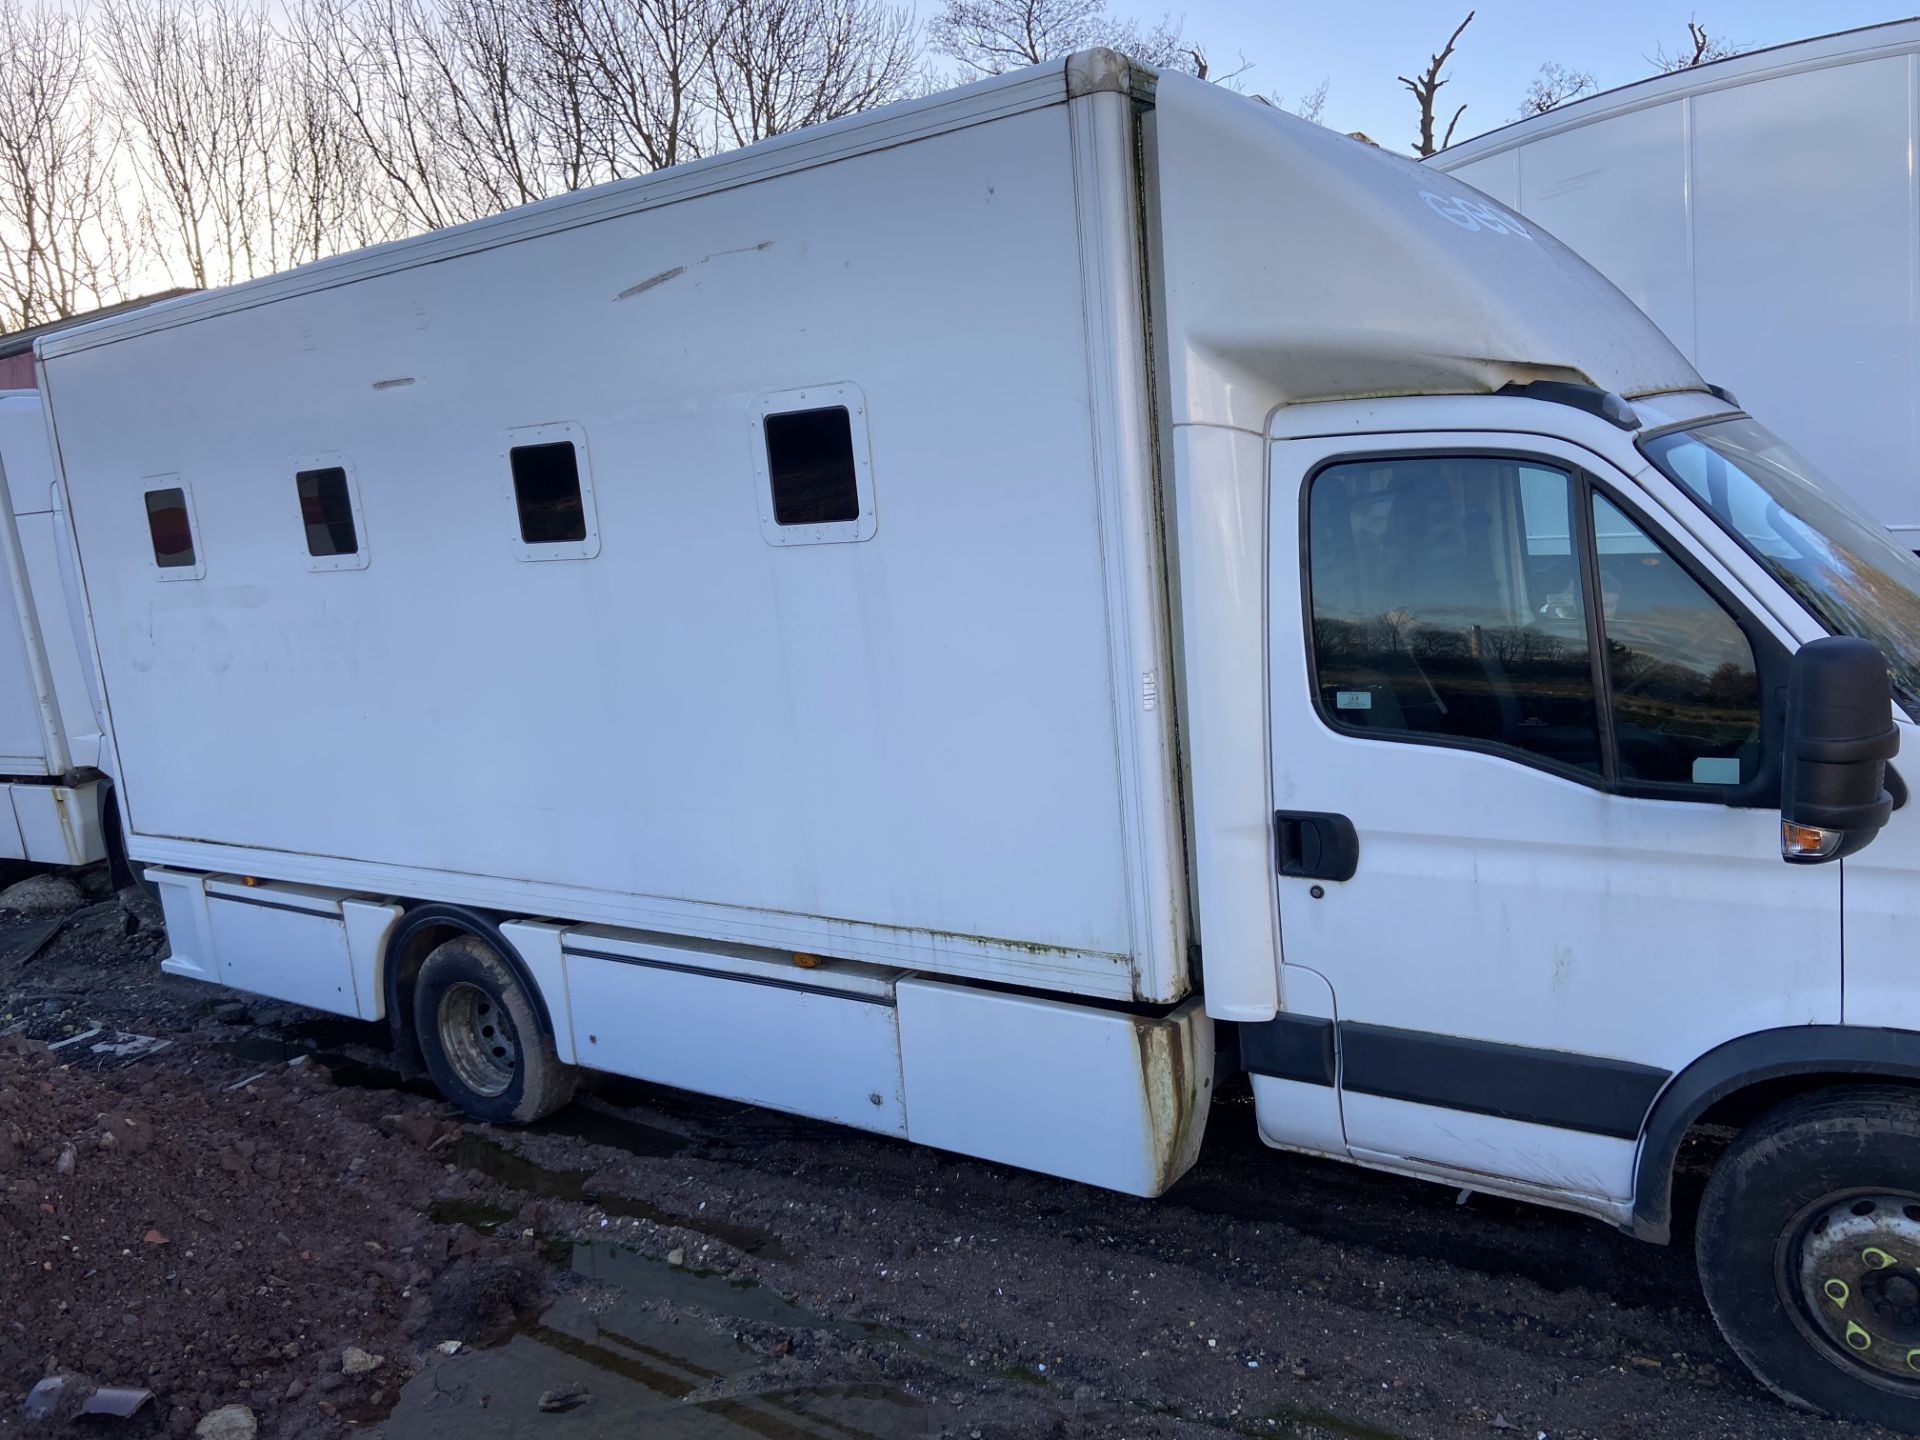 2011 IVECO DAILY 70C17